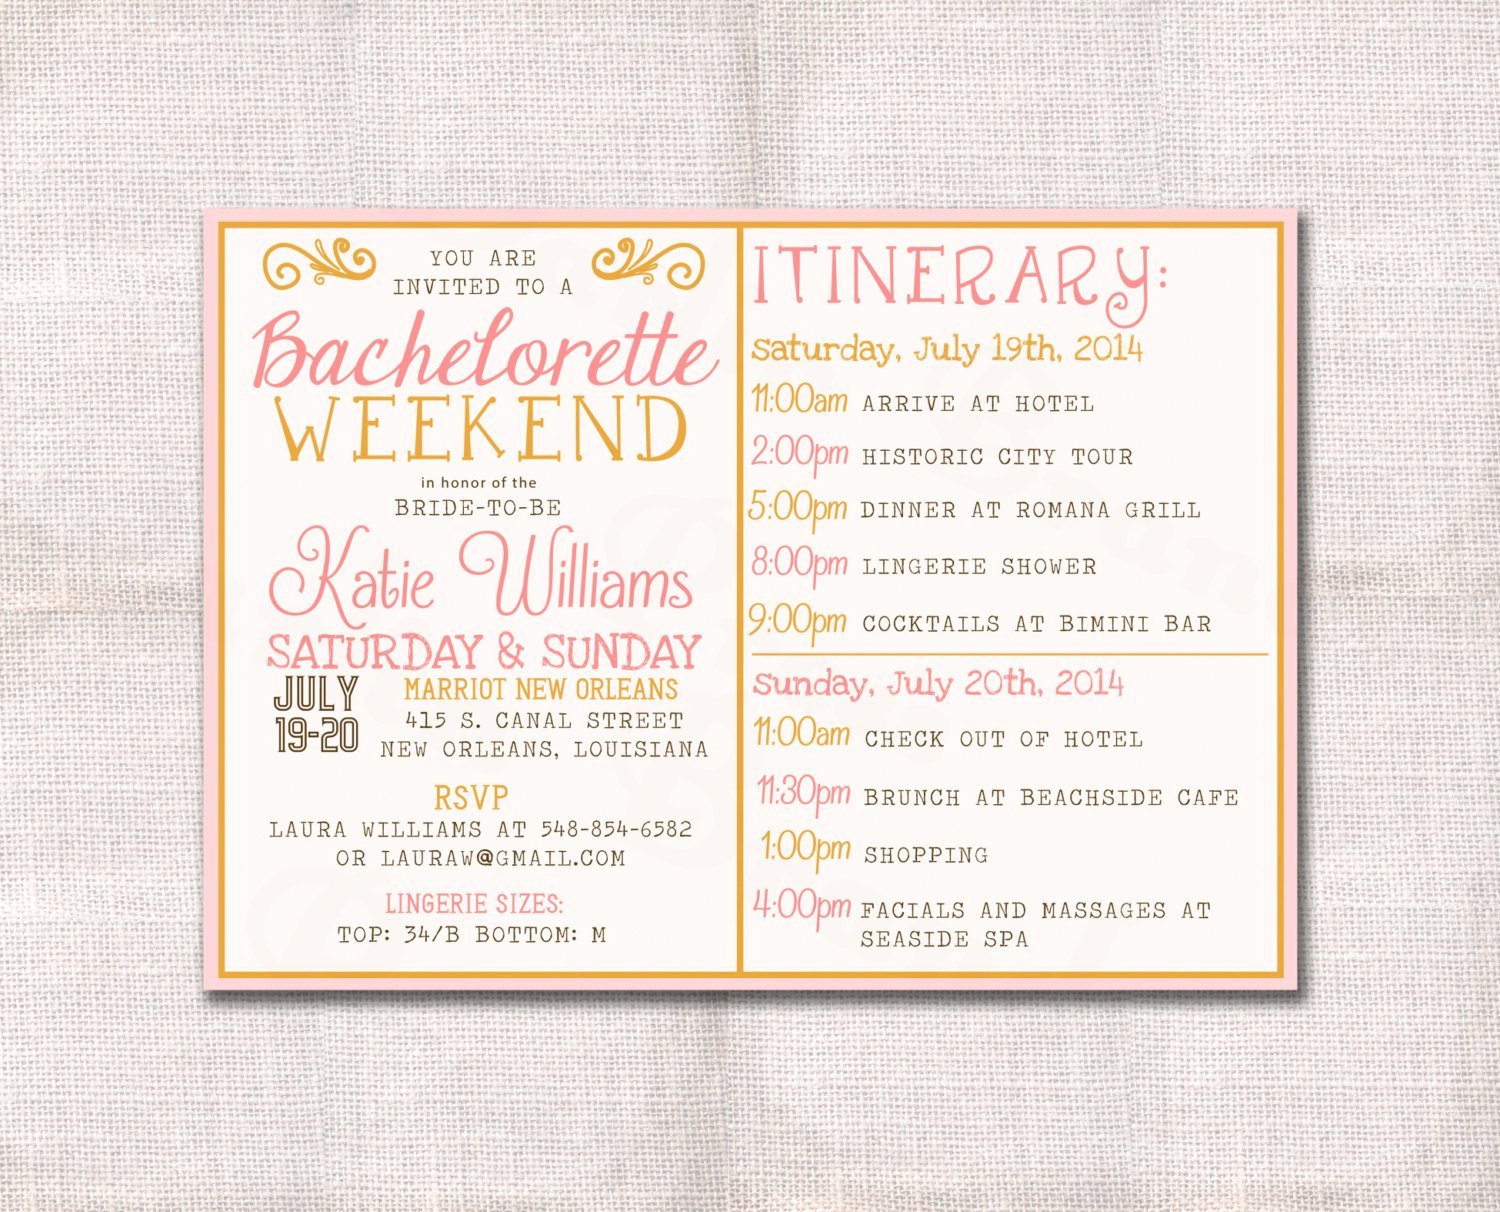 Bachelorette Party Itinerary Template Best Of Bachelorette Party Weekend Invitation and Itinerary Custom